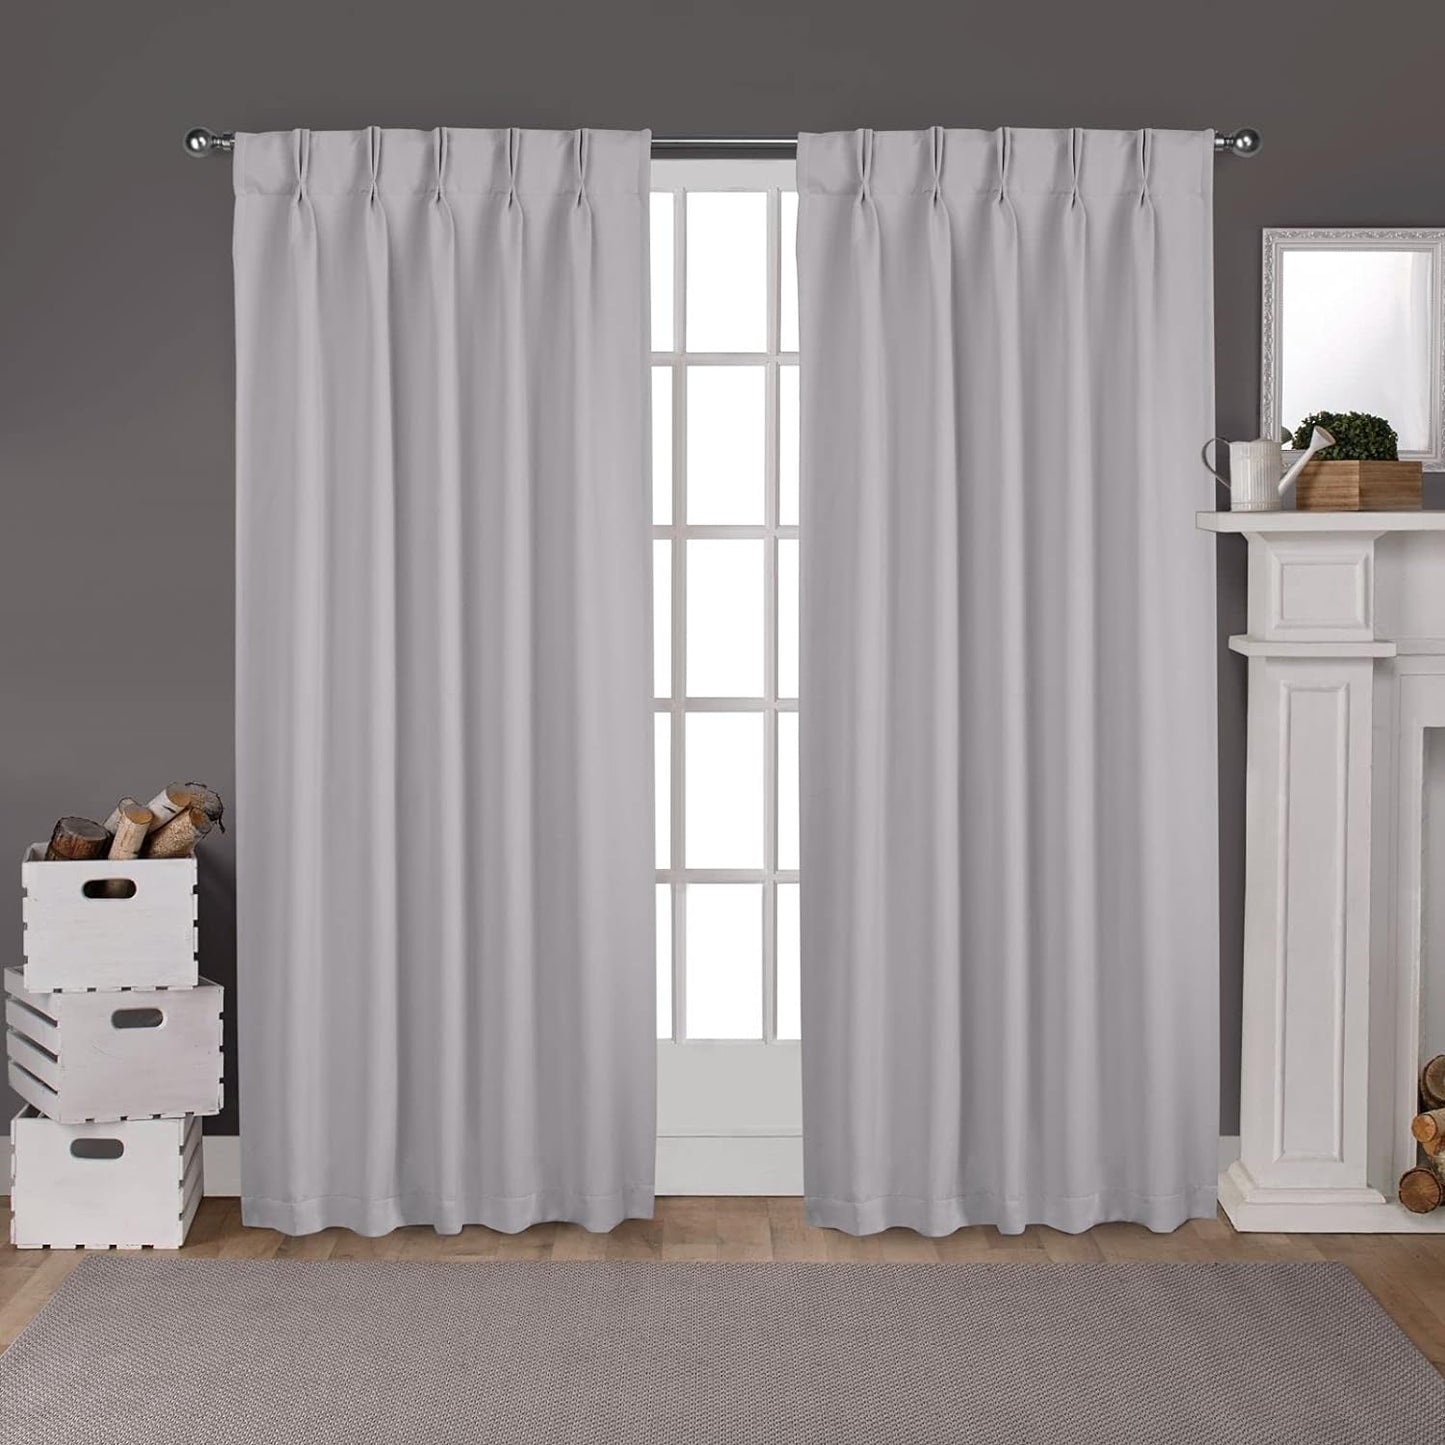 Exclusive Home Sateen Twill Woven Room Darkening Blackout Pinch Pleat/Hidden Tab Top Curtain Panel Pair, 108" Length, Vanilla  Exclusive Home Curtains Silver 96" Length 